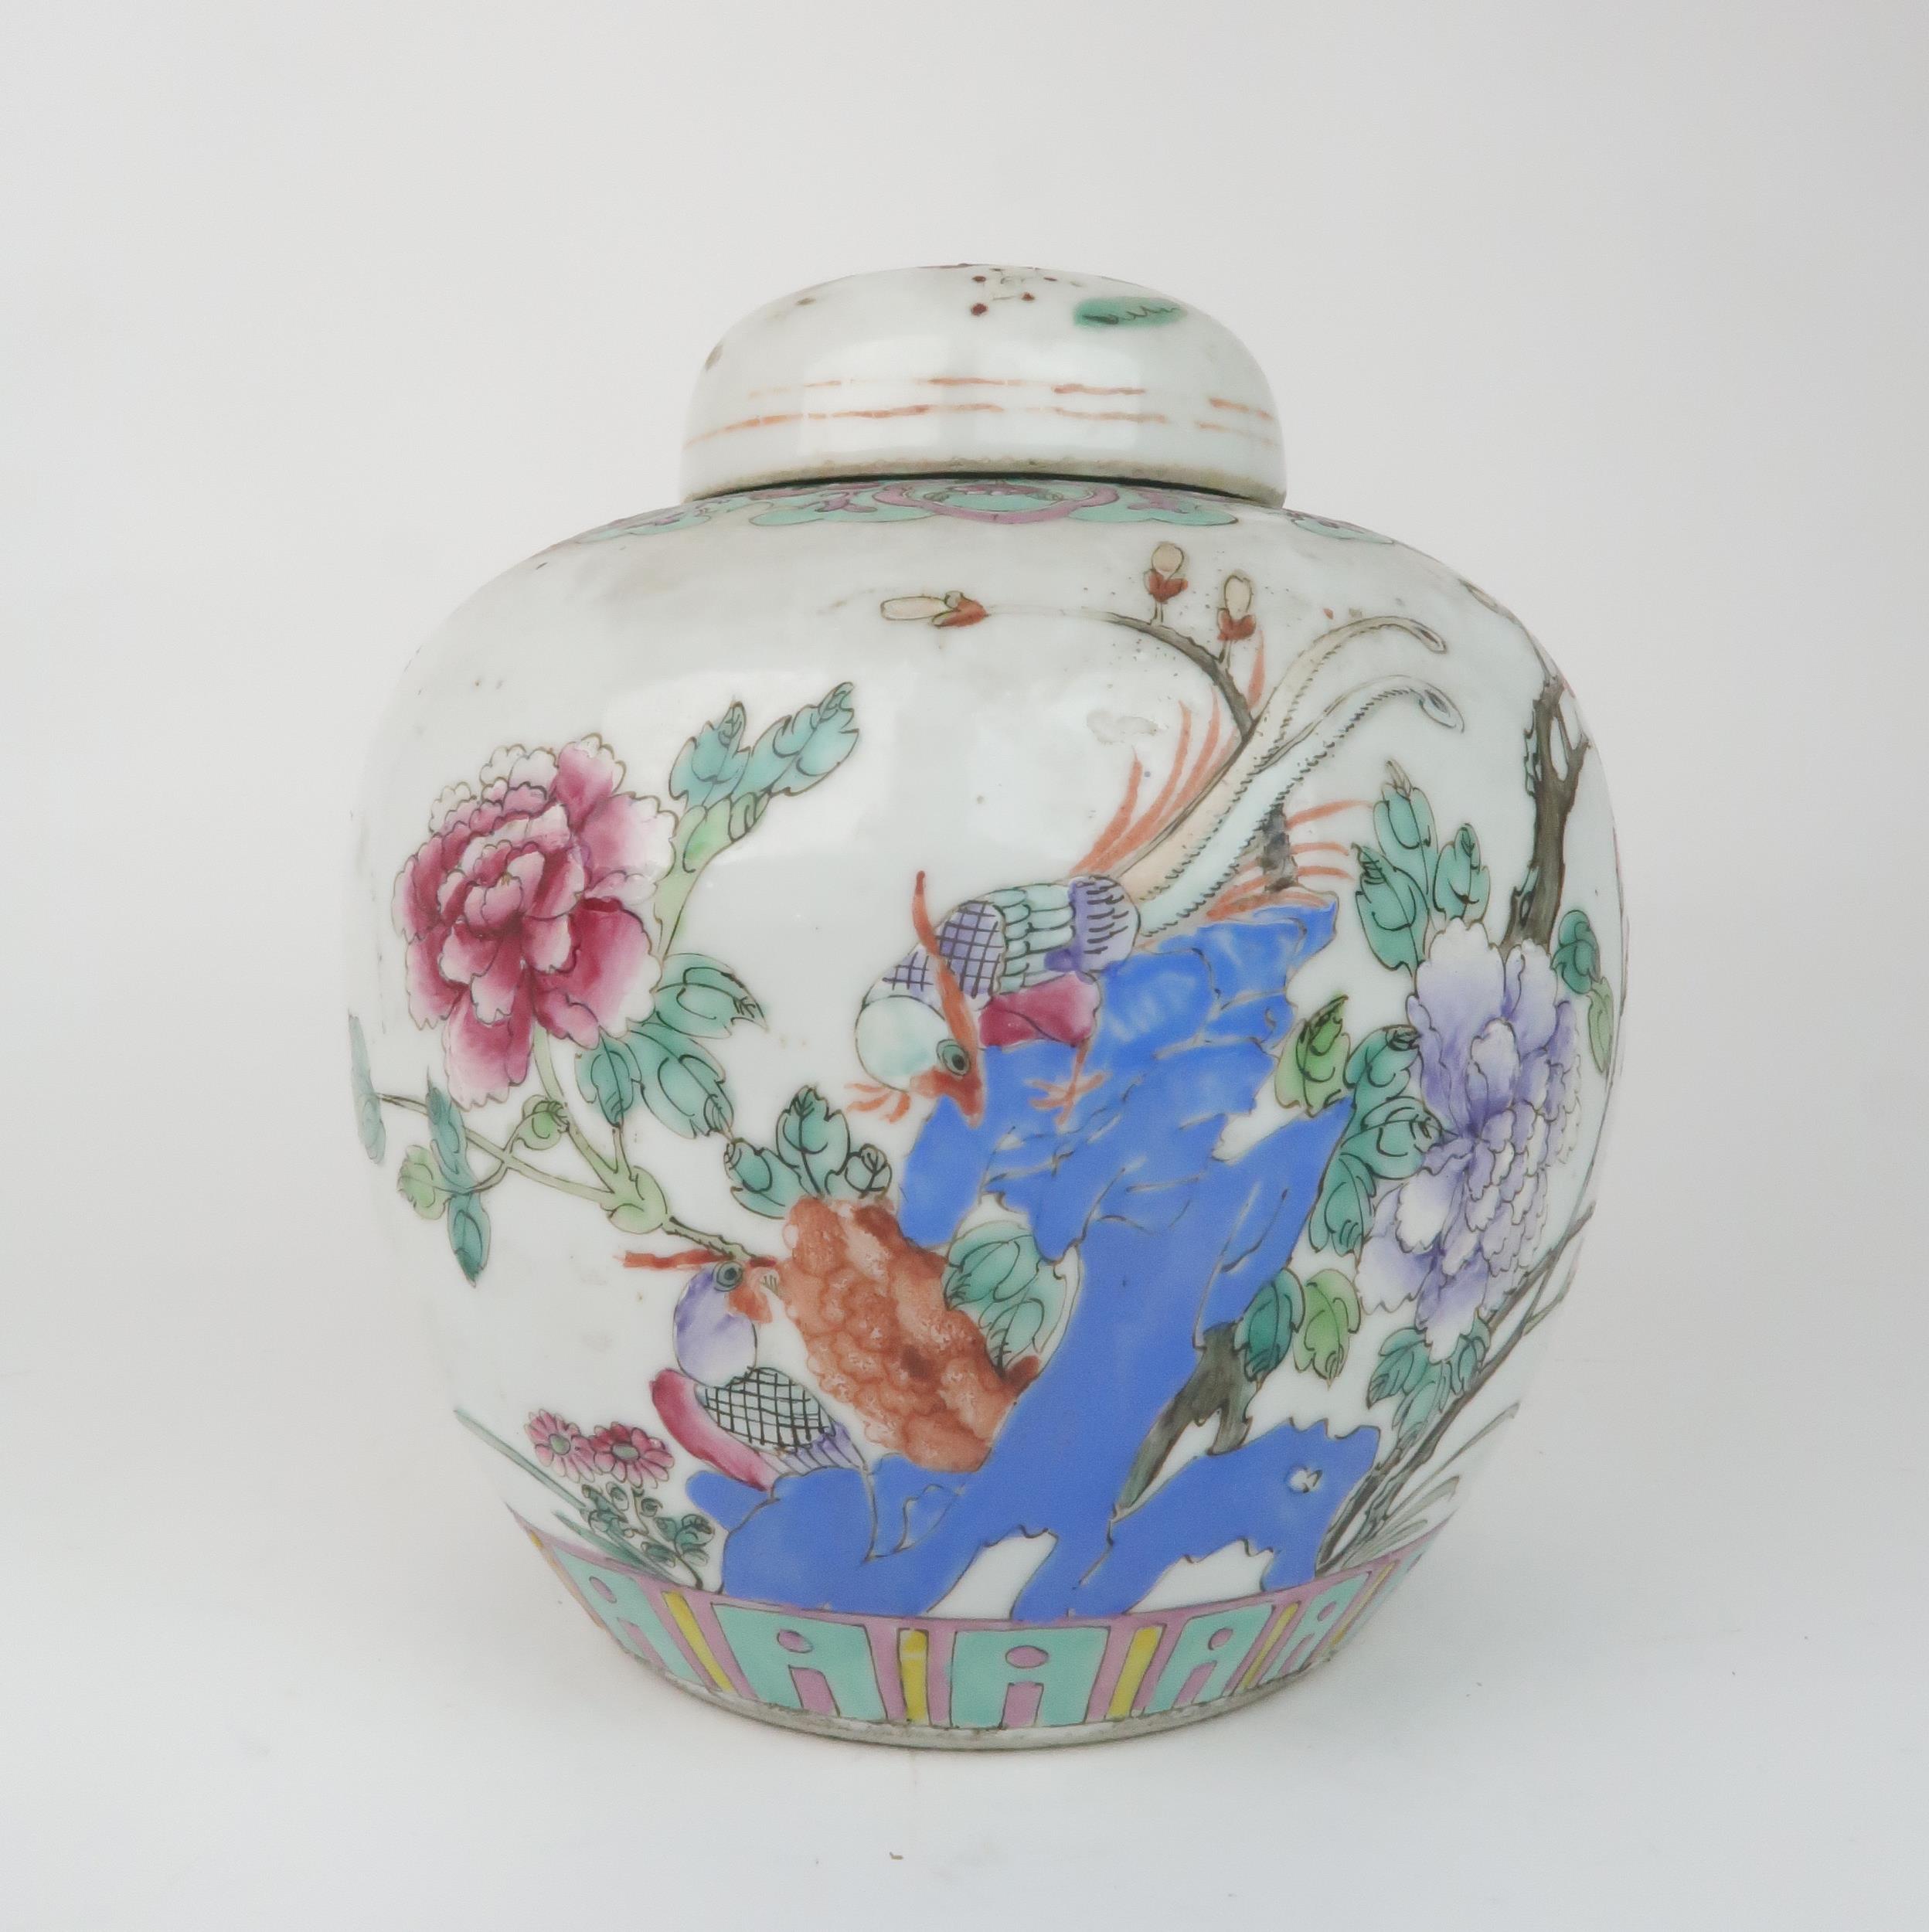 A CHINESE FAMILLE ROSE GINGER JAR AND COVER  painted with birds amongst foliage within formal bands,